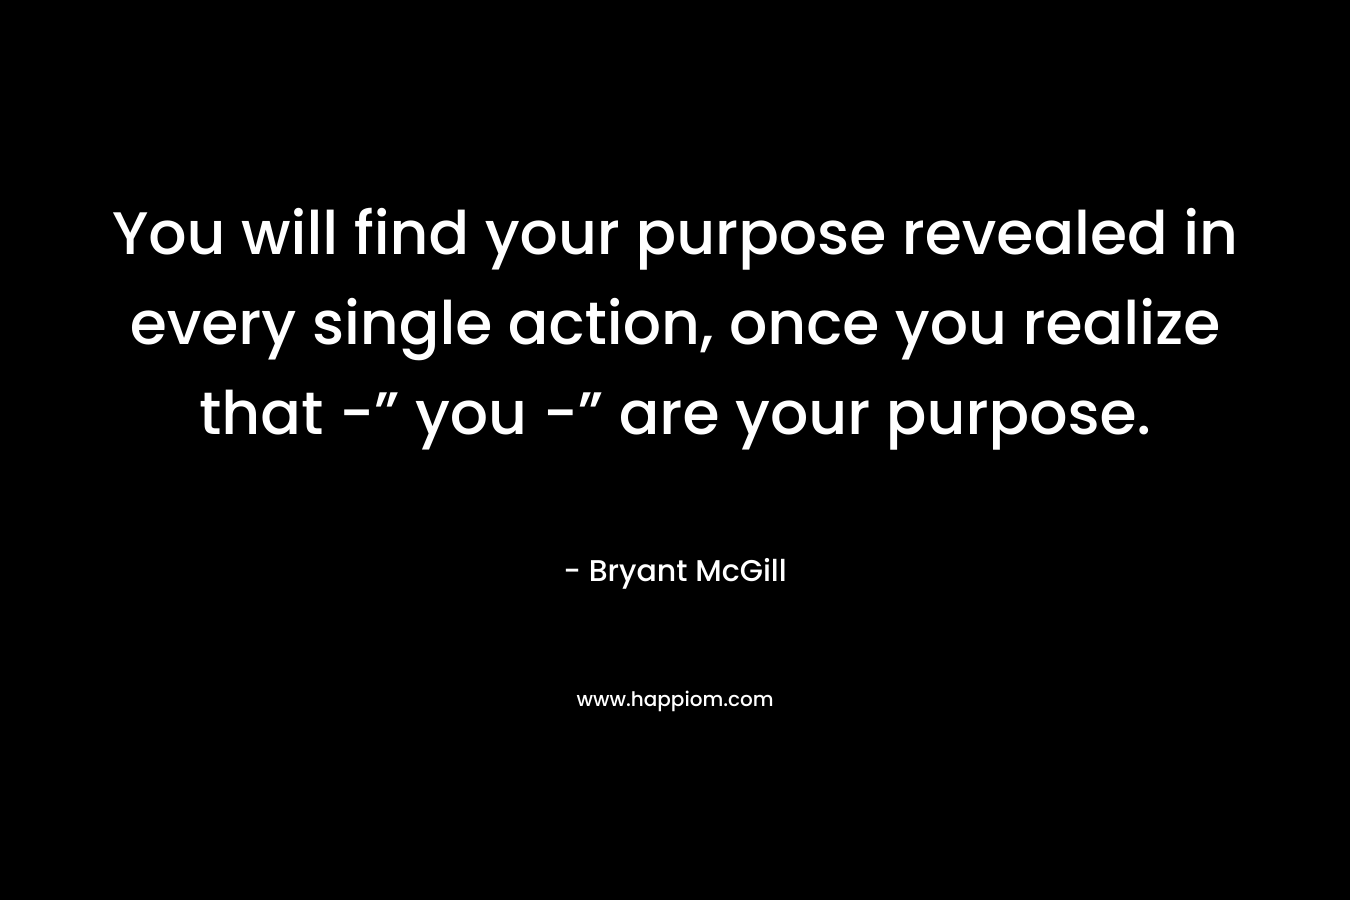 You will find your purpose revealed in every single action, once you realize that -” you -” are your purpose. – Bryant McGill